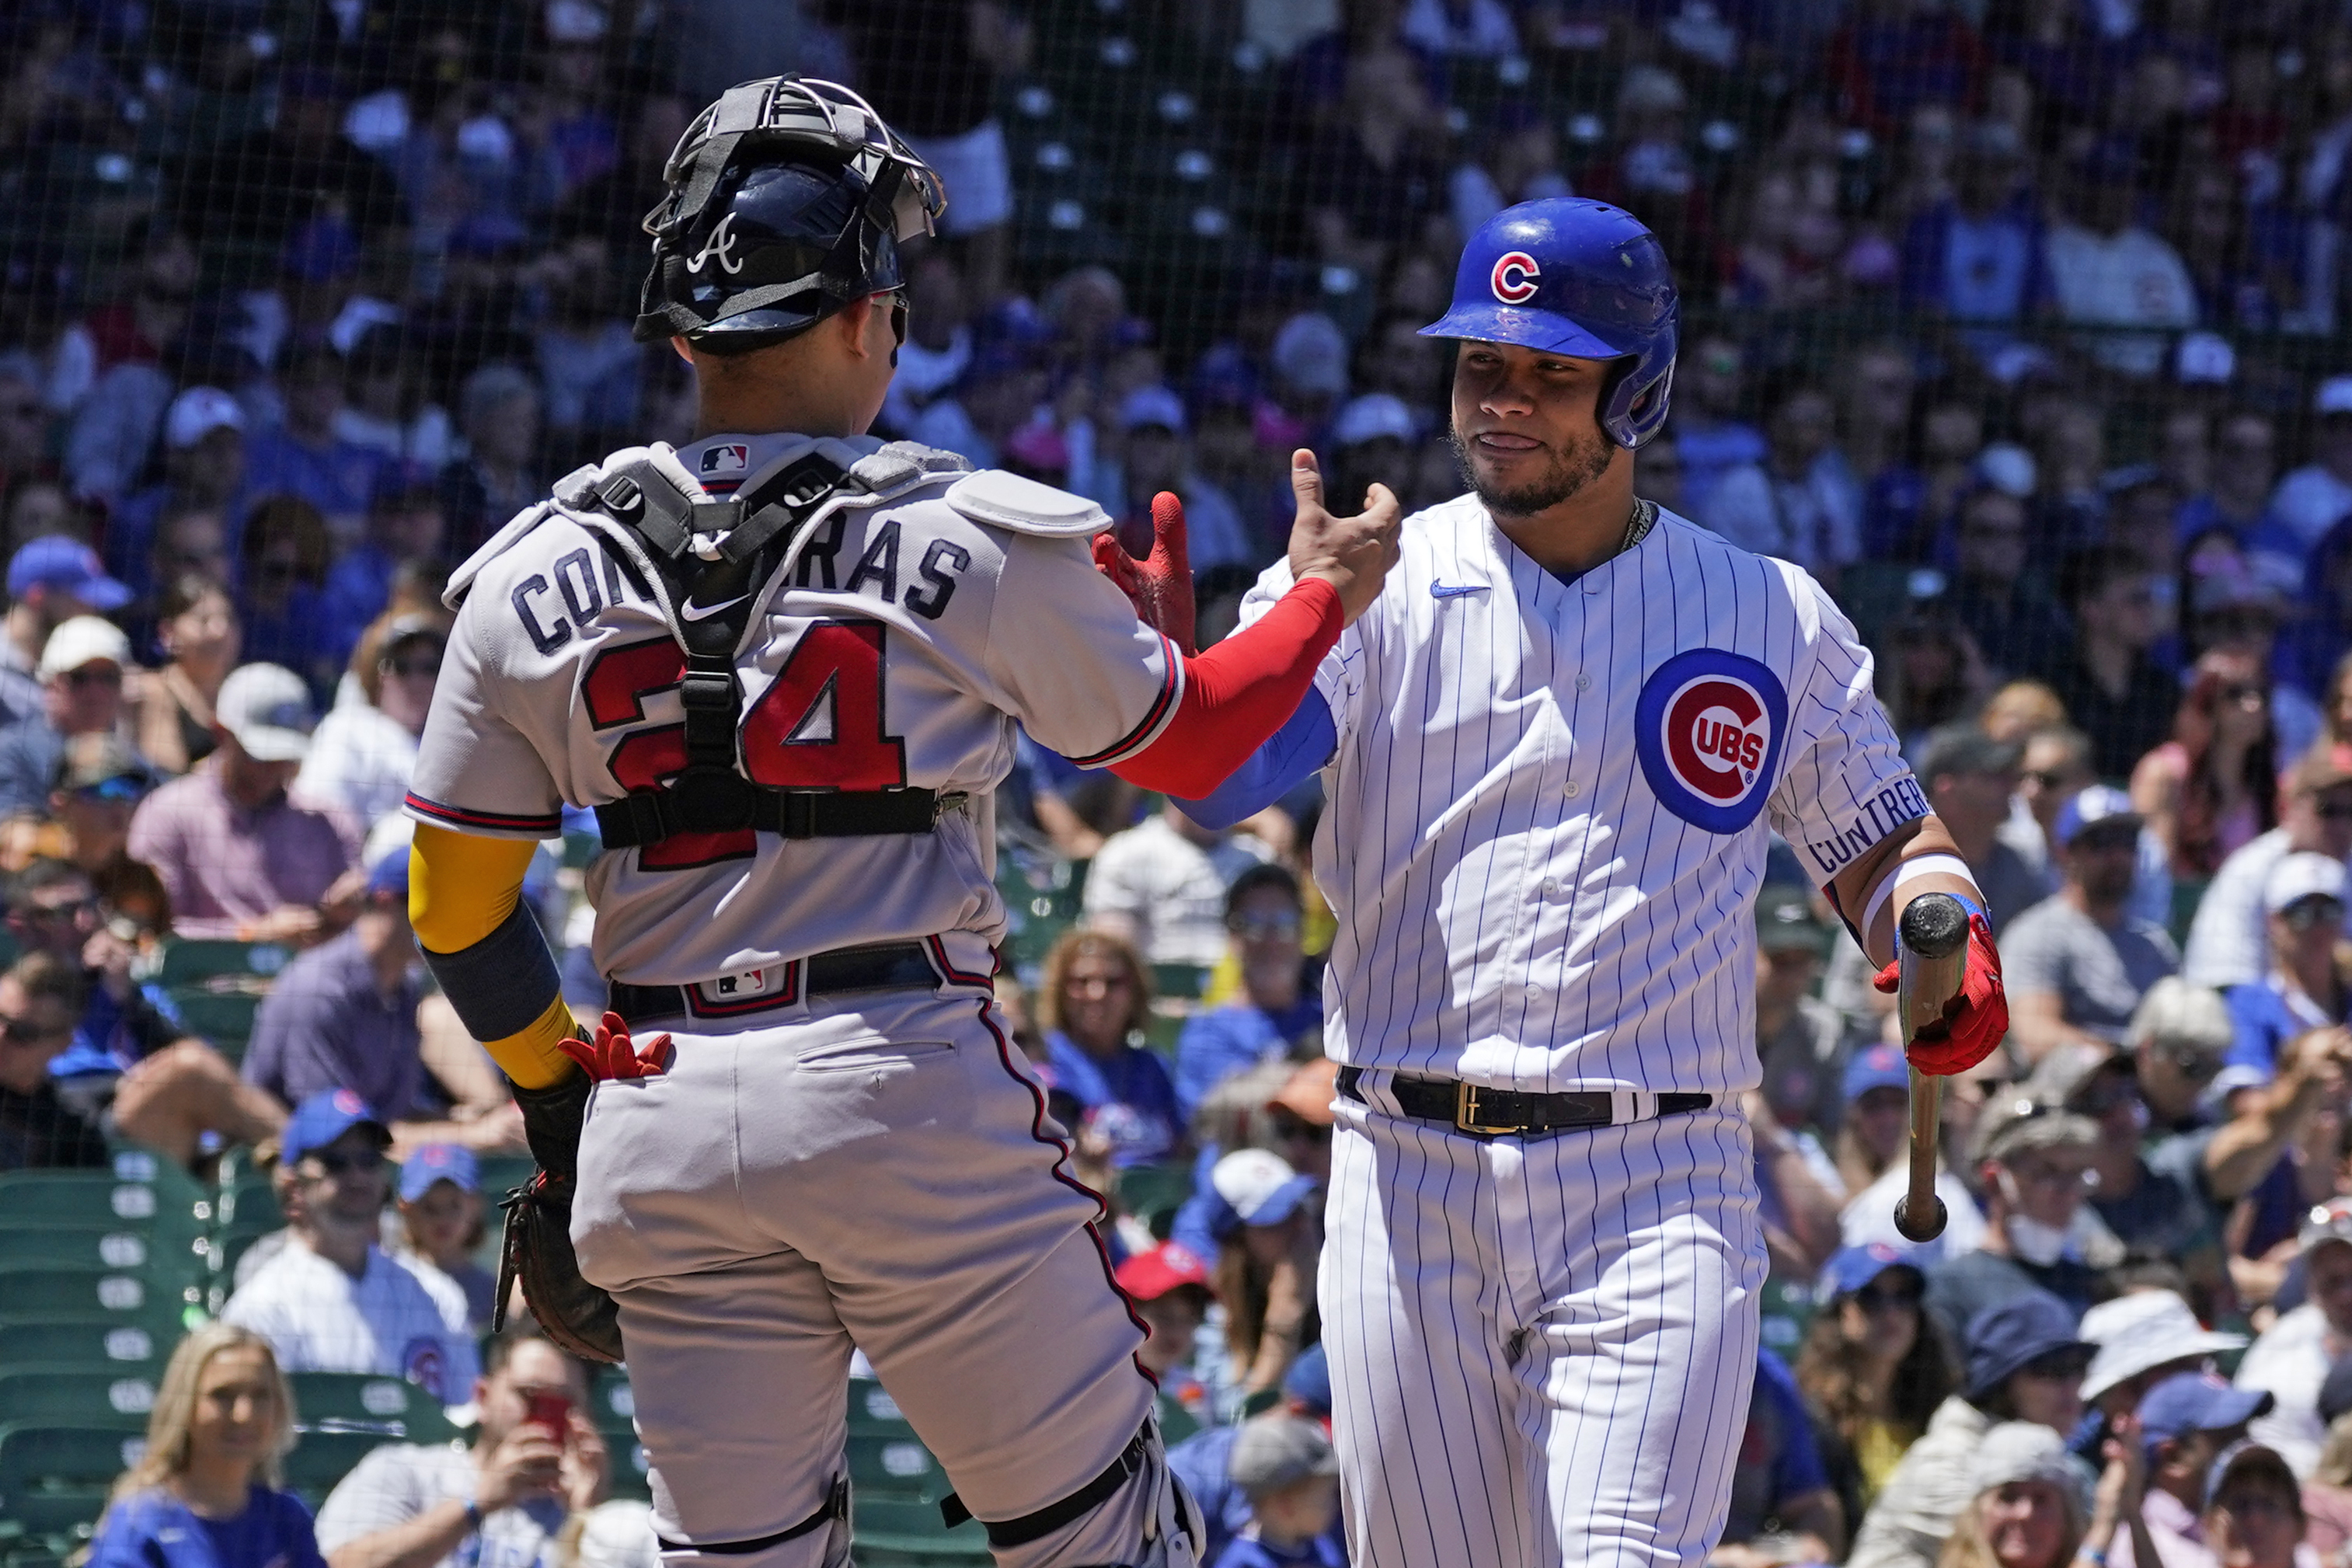 Cubs' Contreras gets 3 hits and steal, beats brother, Braves